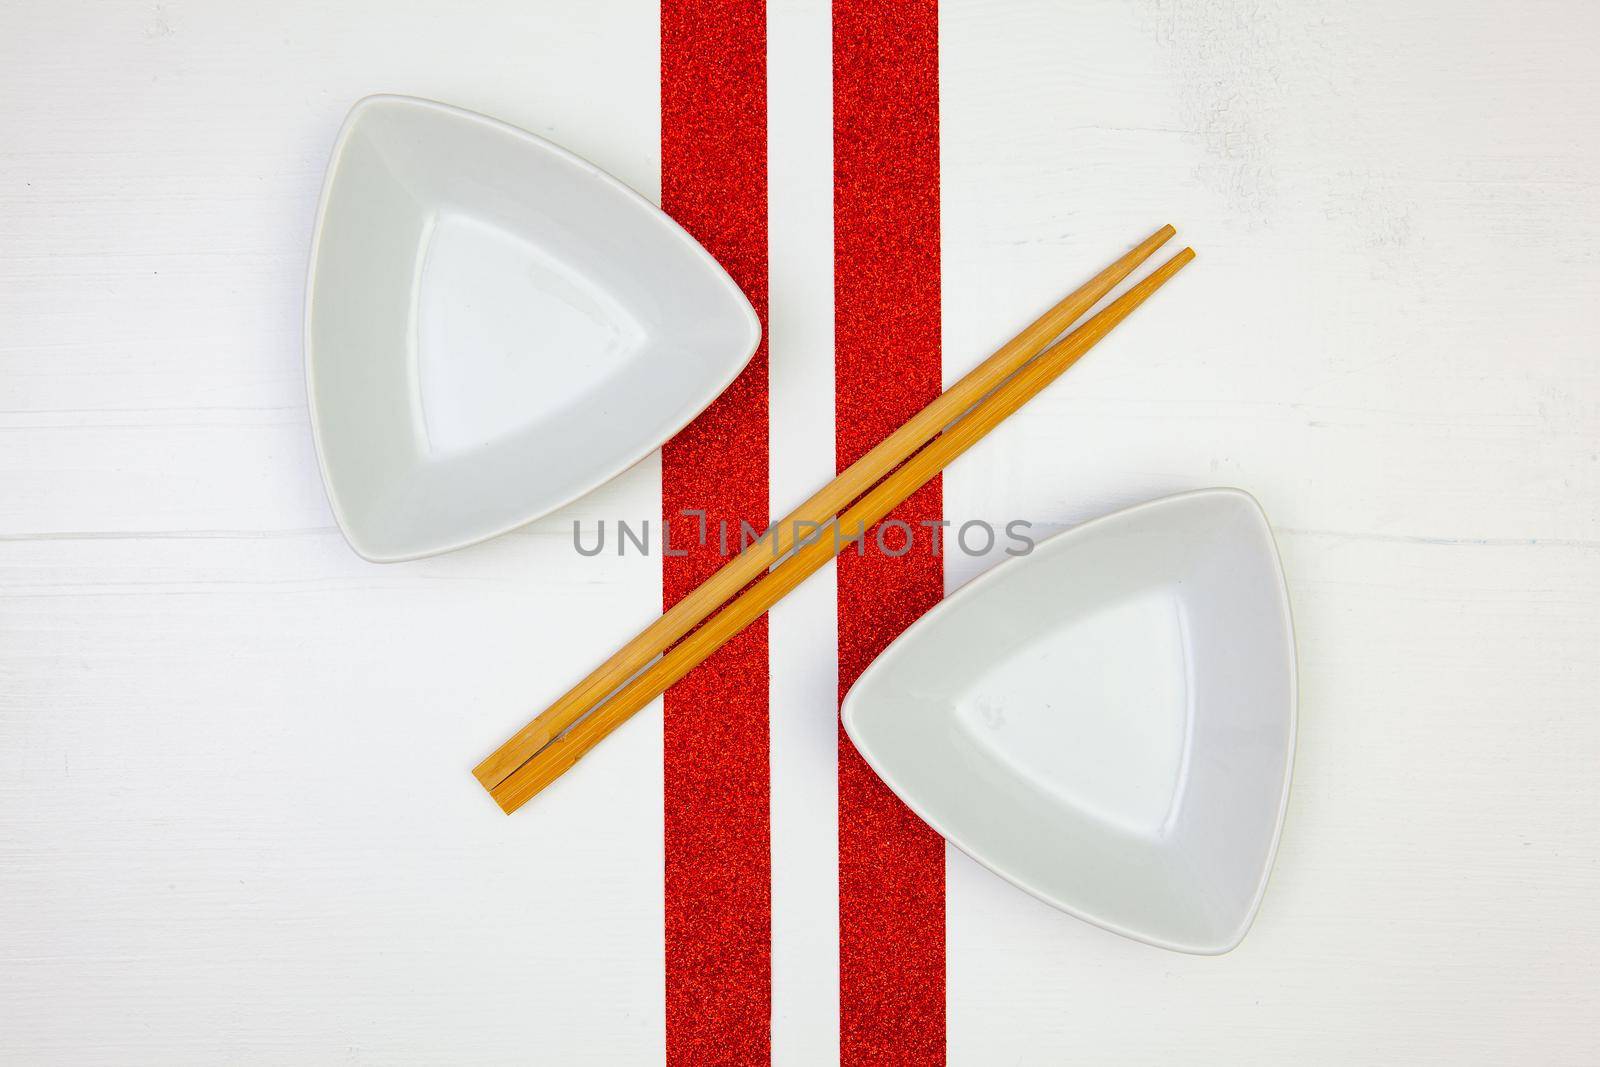 Ceramic bowls  and bamboo chopsticks for sushi food with on the white wooden table.Top view. Flat Lay Image.